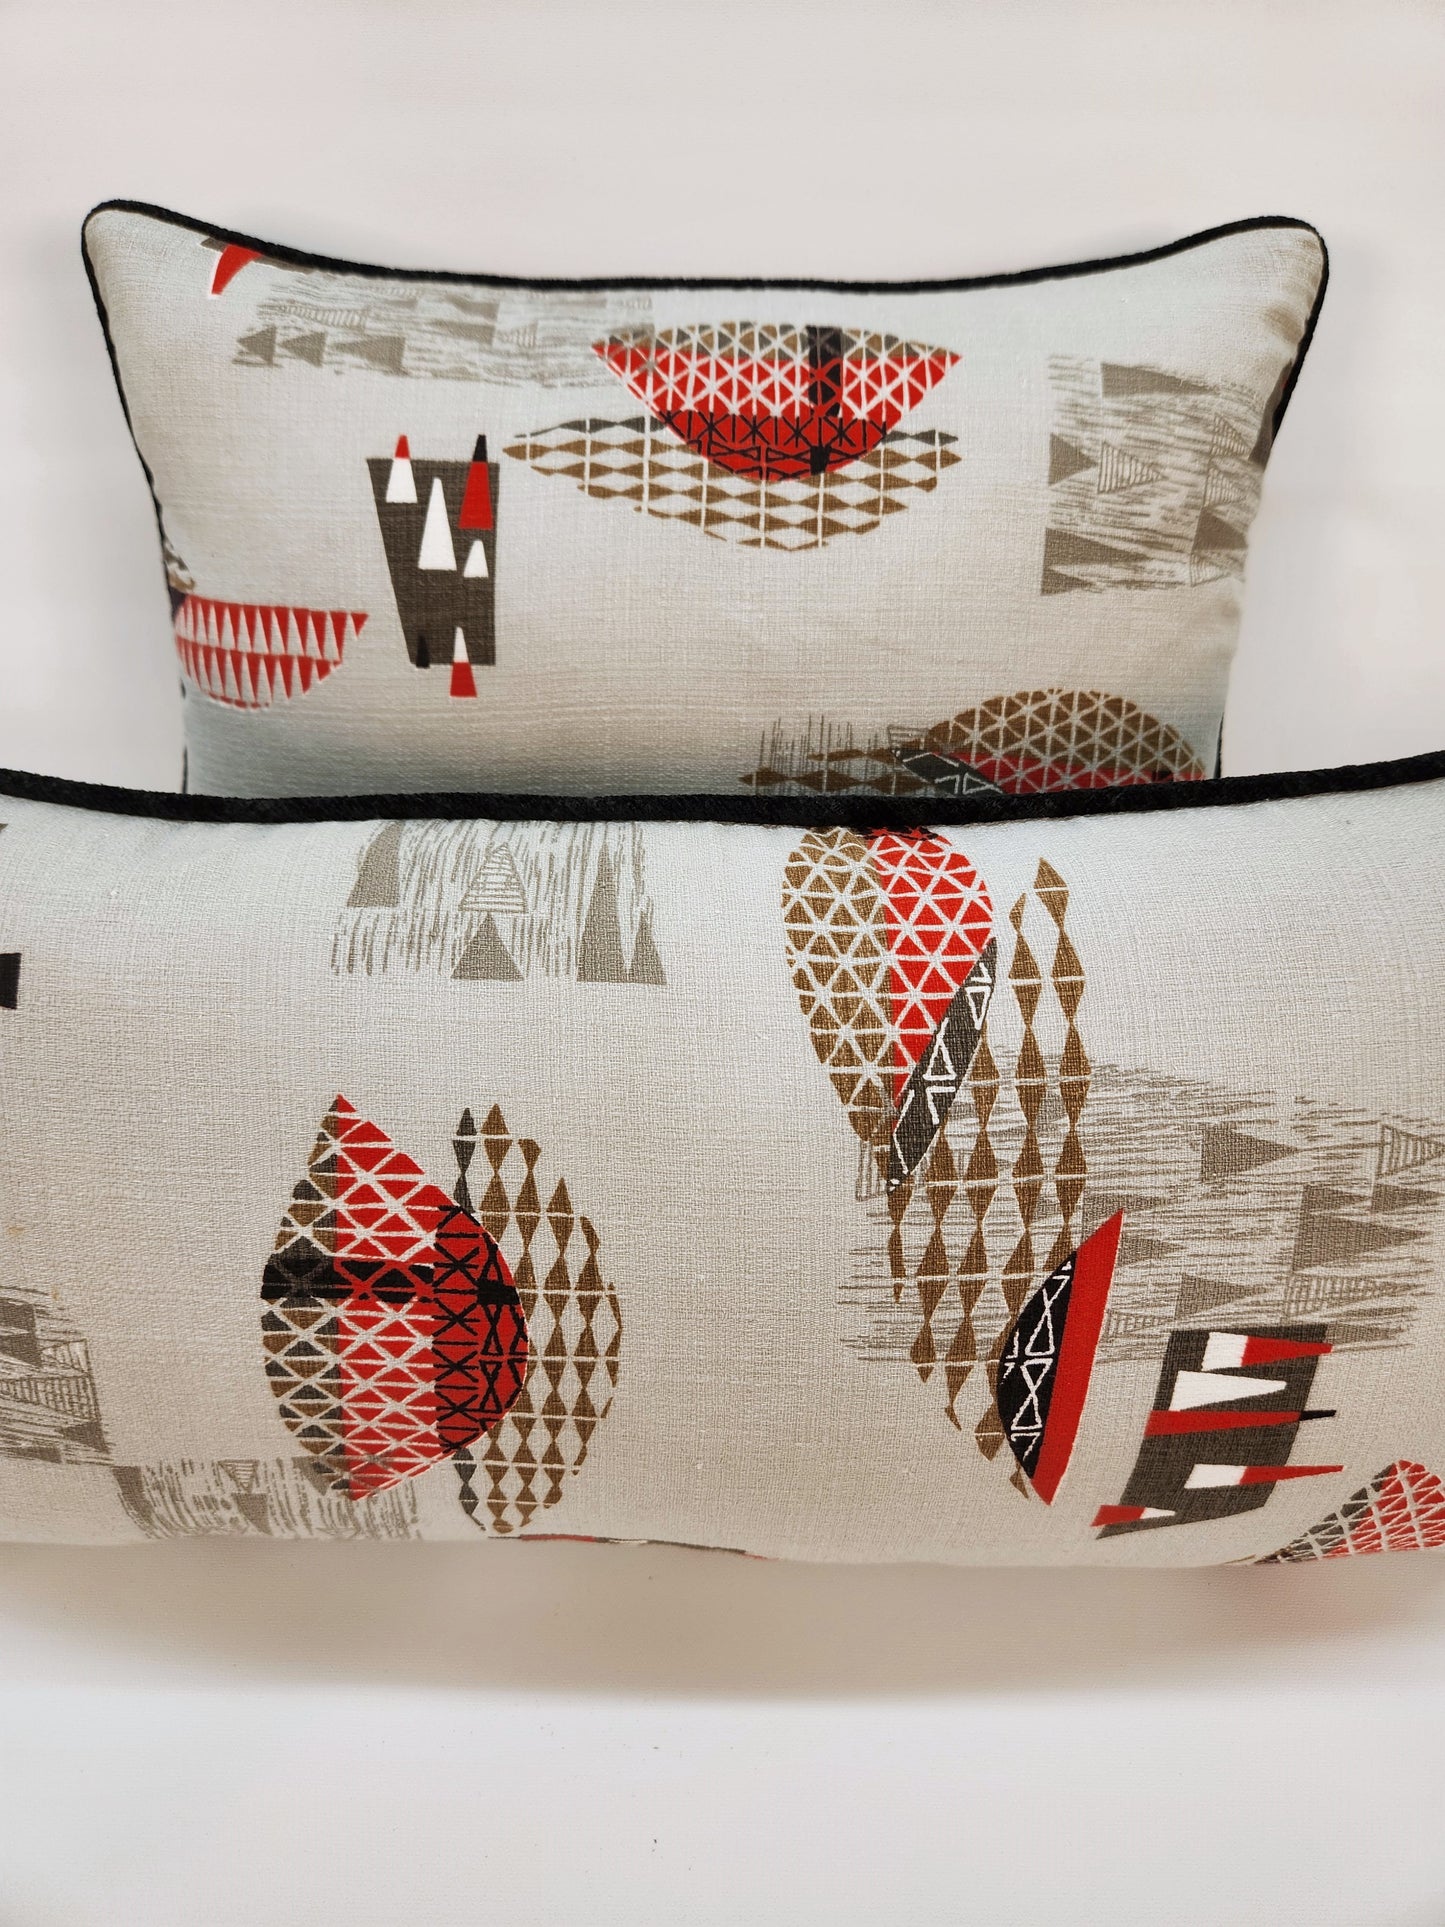 Atomic 1950s Vintage Barkcloth 12x24 Lumbar Pillow: Black, Red, Brown on Light Grey, Mid-Century-Modern, Only 3 Available